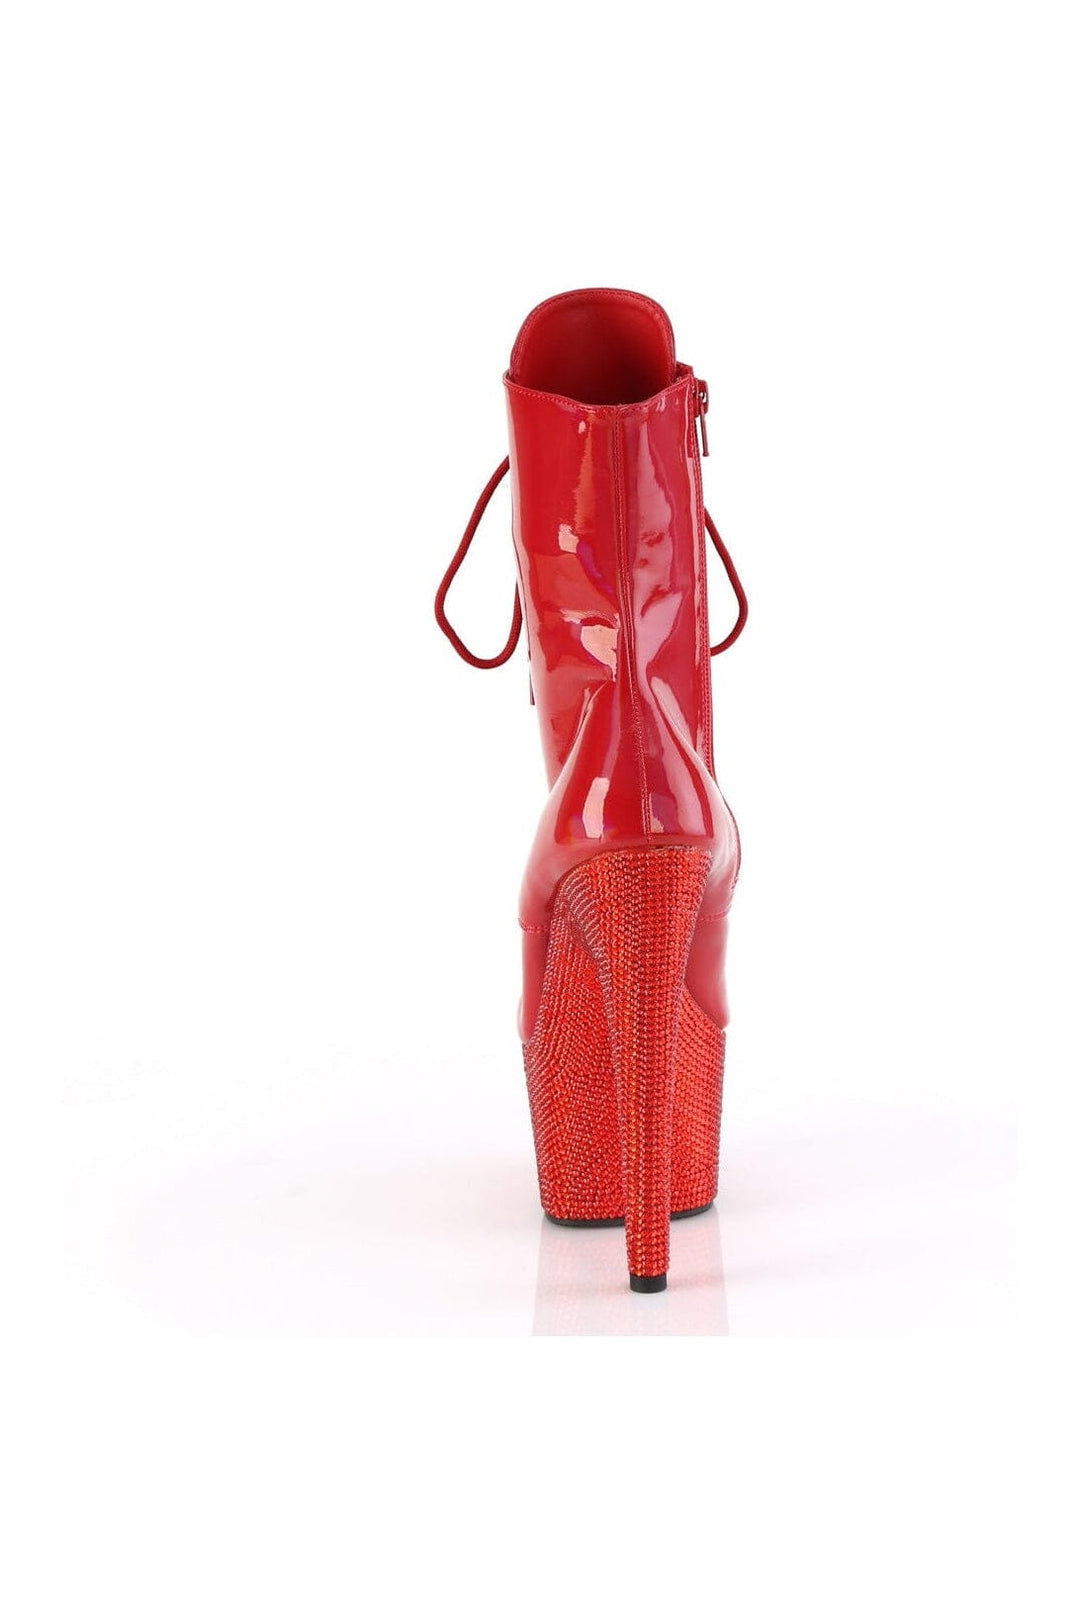 BEJEWELED-1020-7 Red Patent Ankle Boot-Ankle Boots-Pleaser-SEXYSHOES.COM